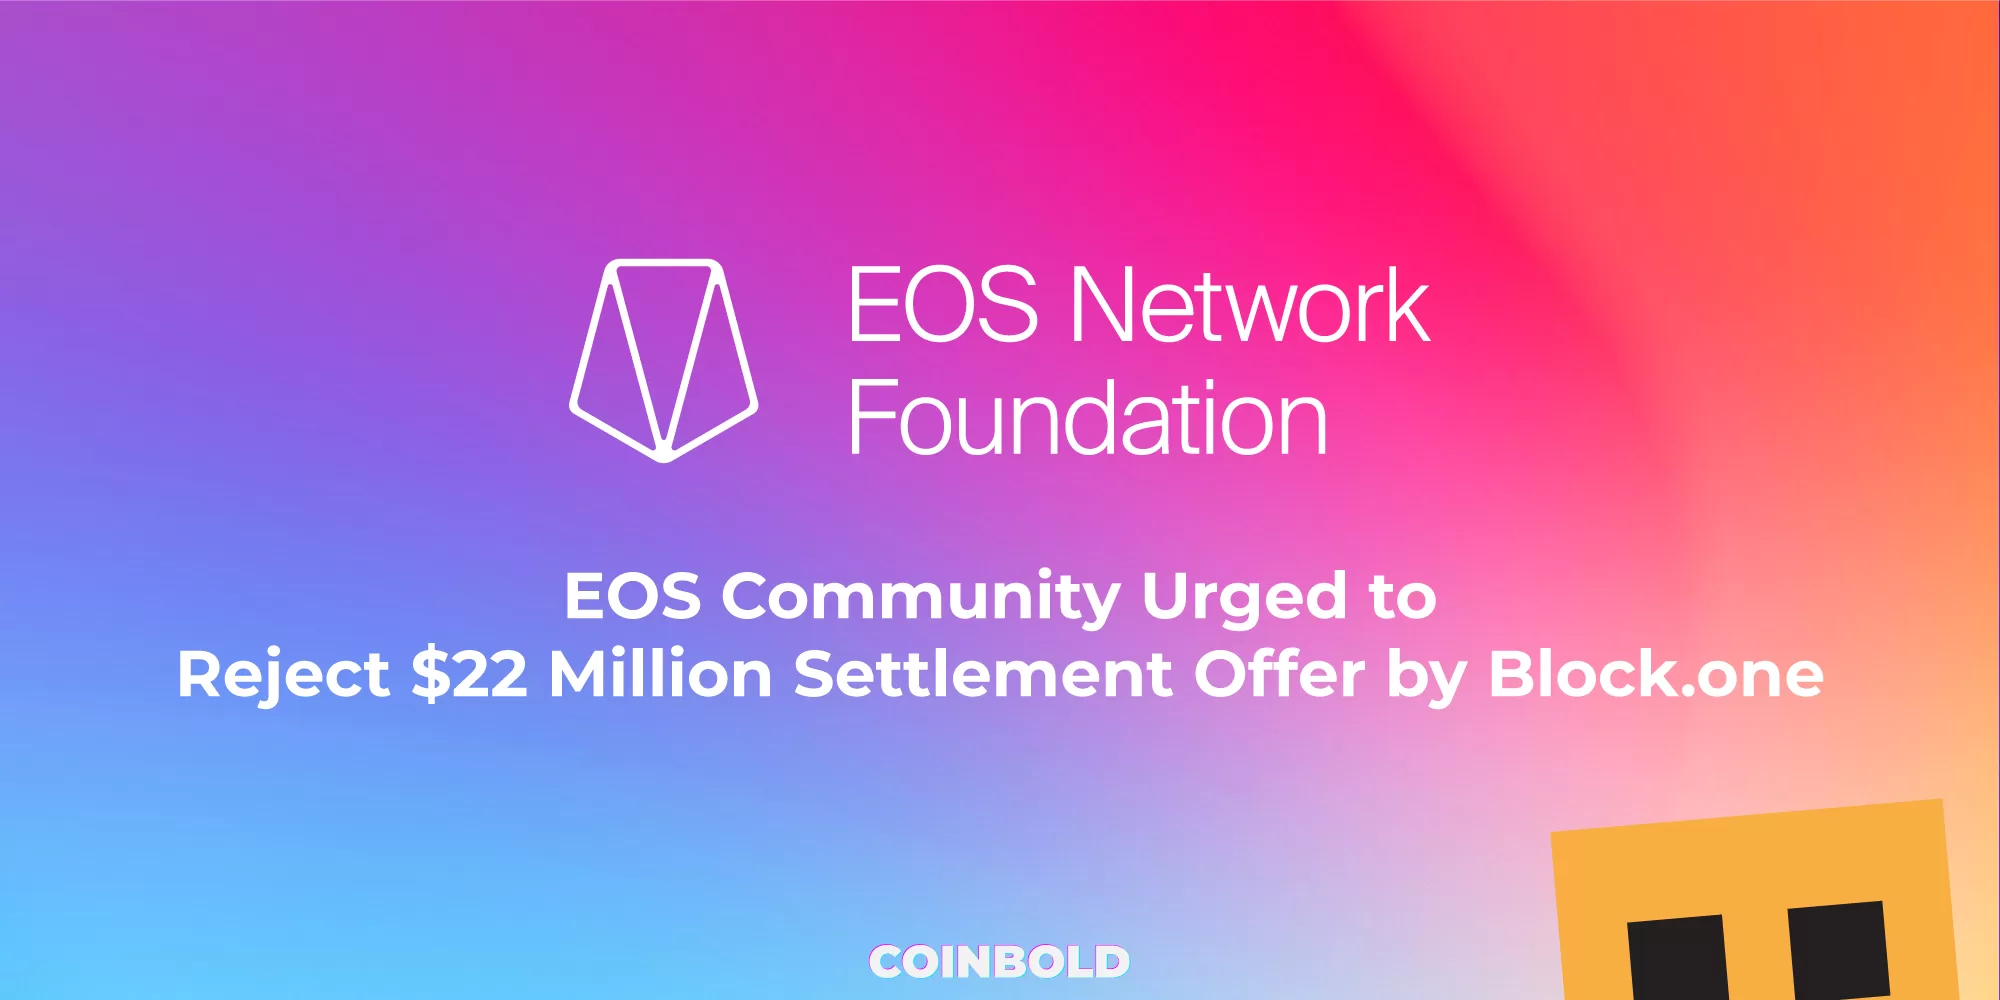 EOS Community Urged to Reject $22 Million Settlement Offer by Block.one